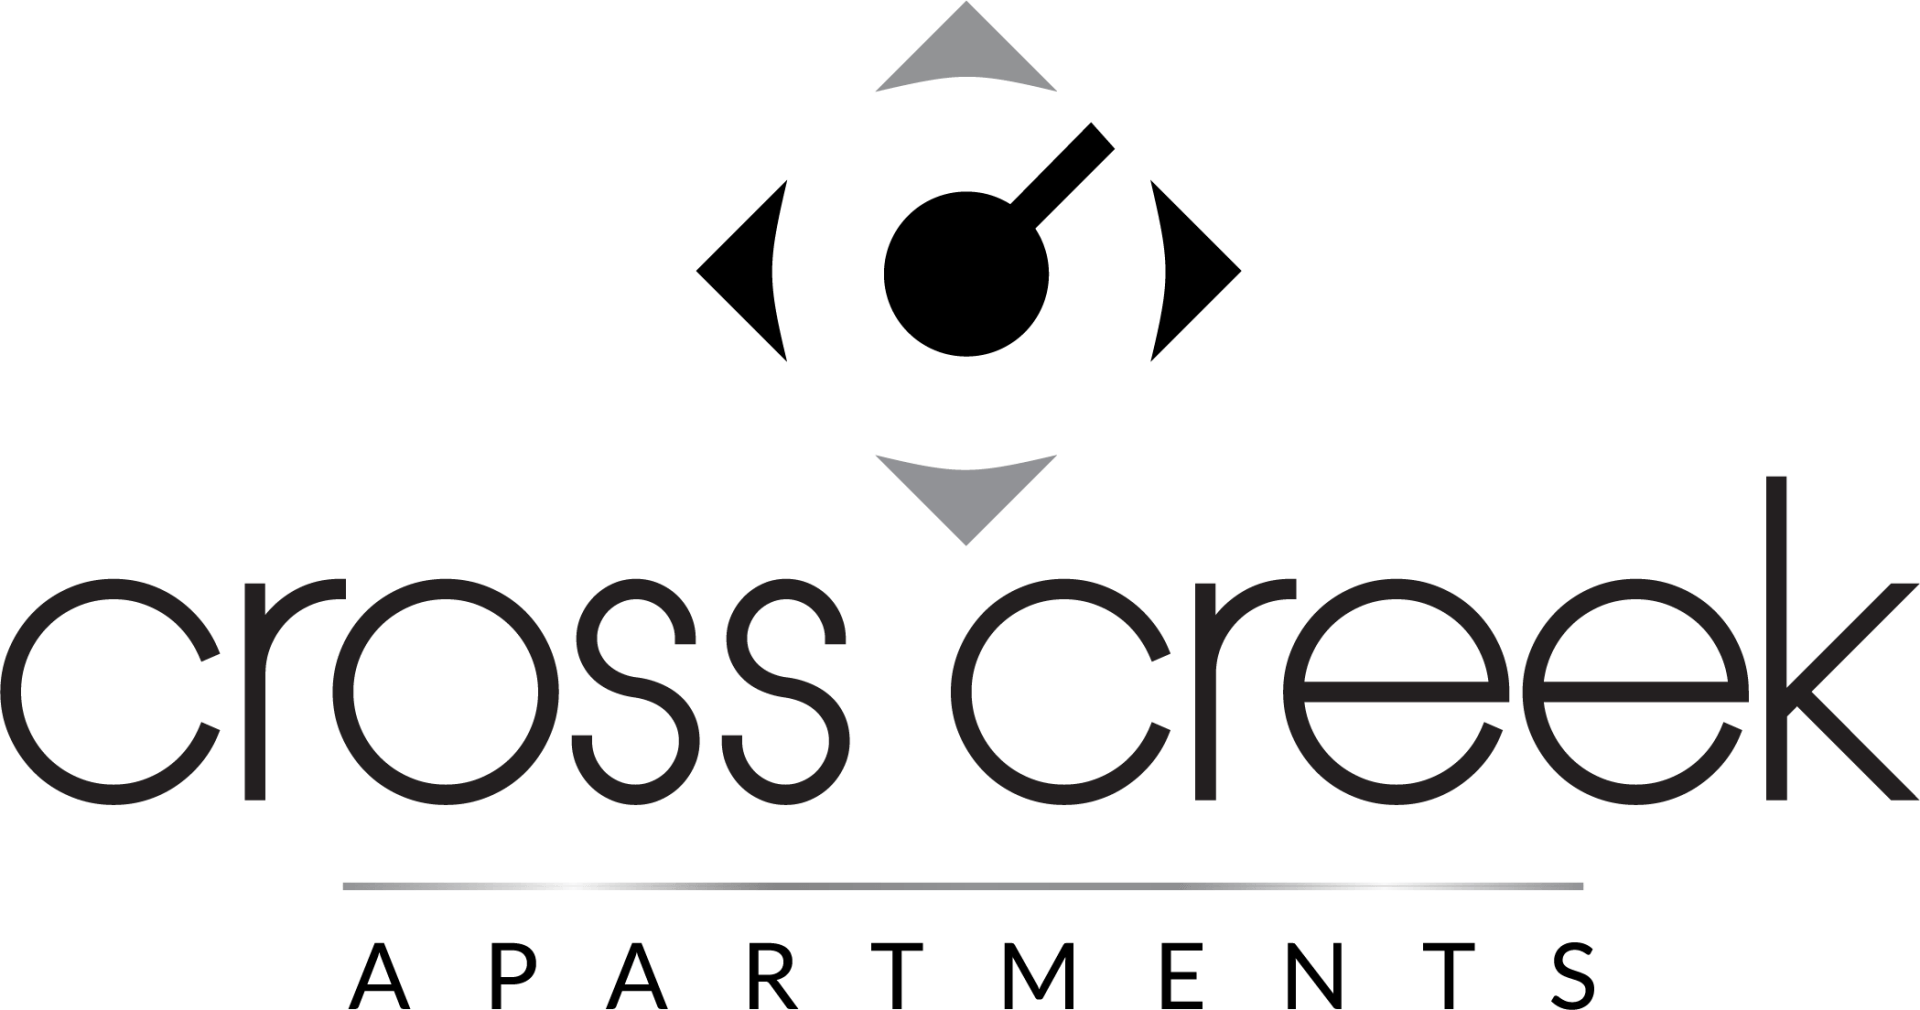 Cross Creek Apartments logo and link to homepage